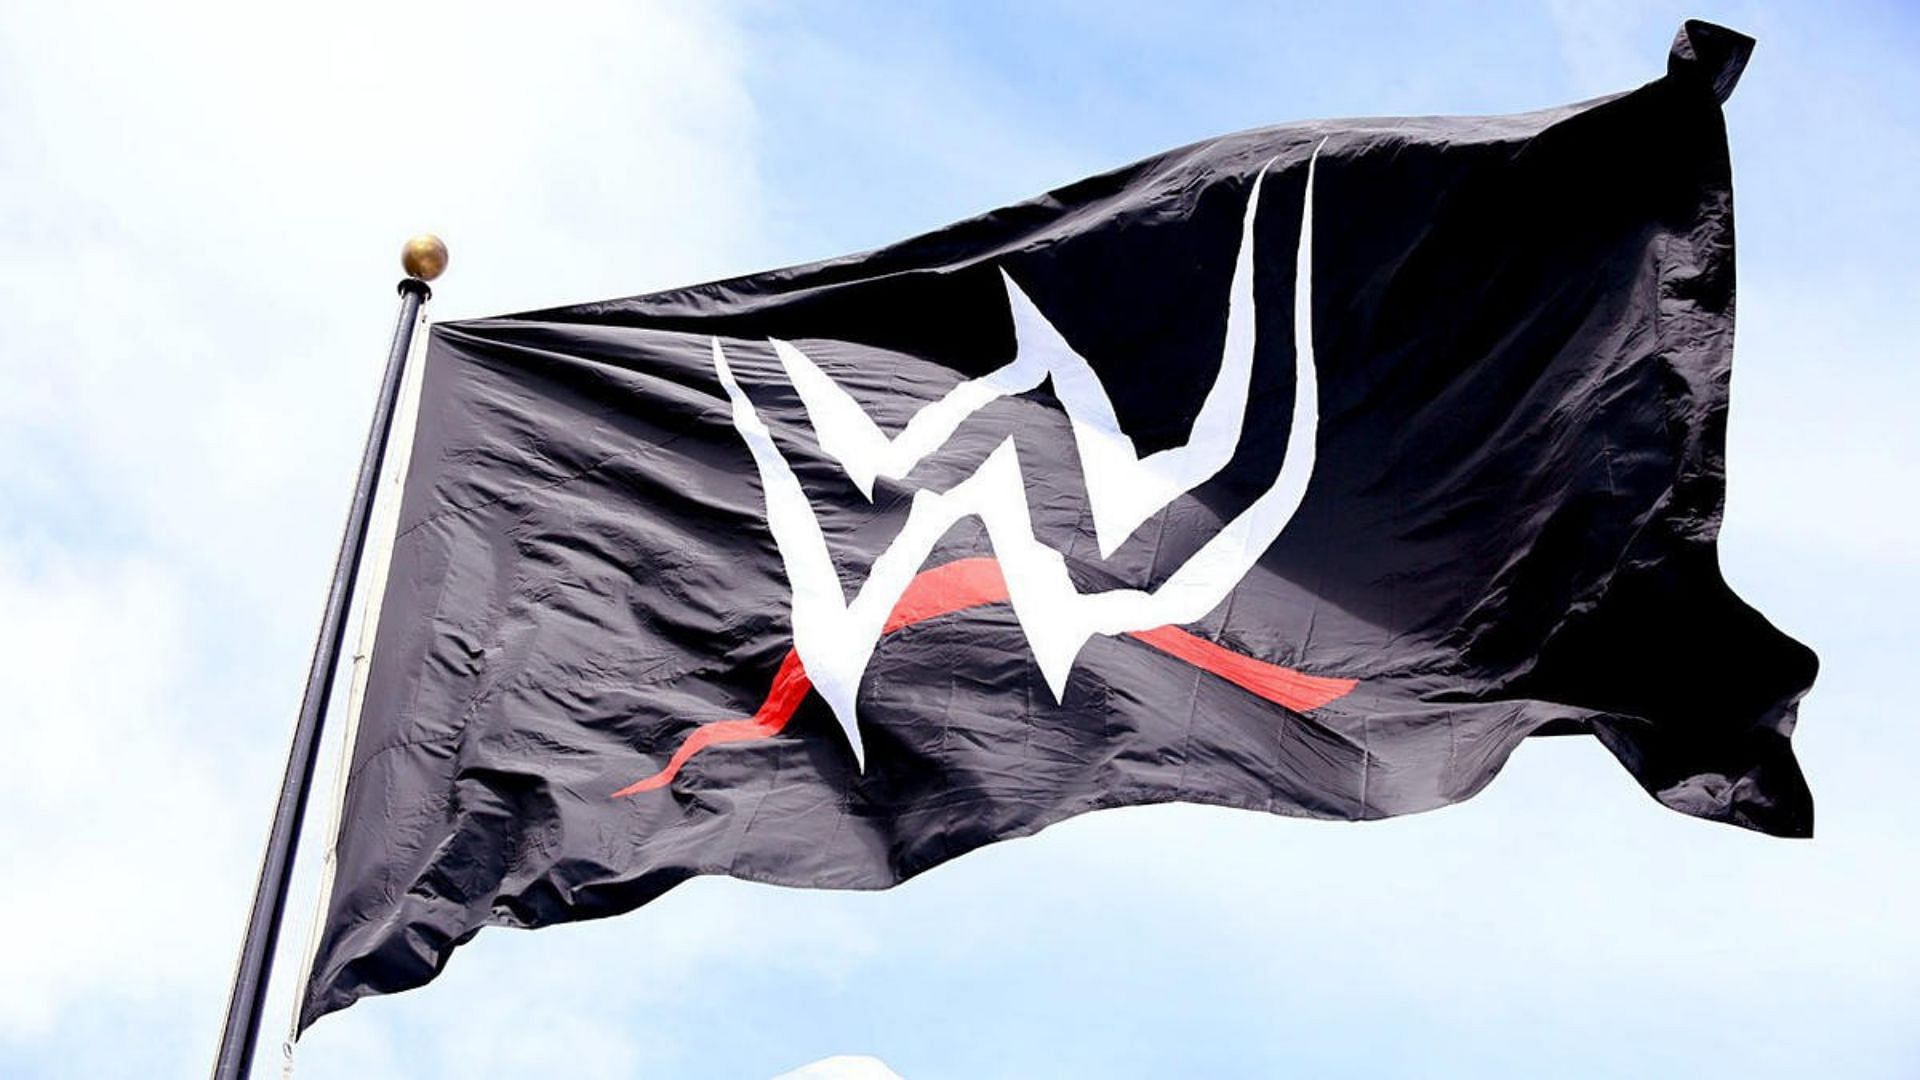 WWE is a Stamford-based wrestling promotion at the top of the industry today